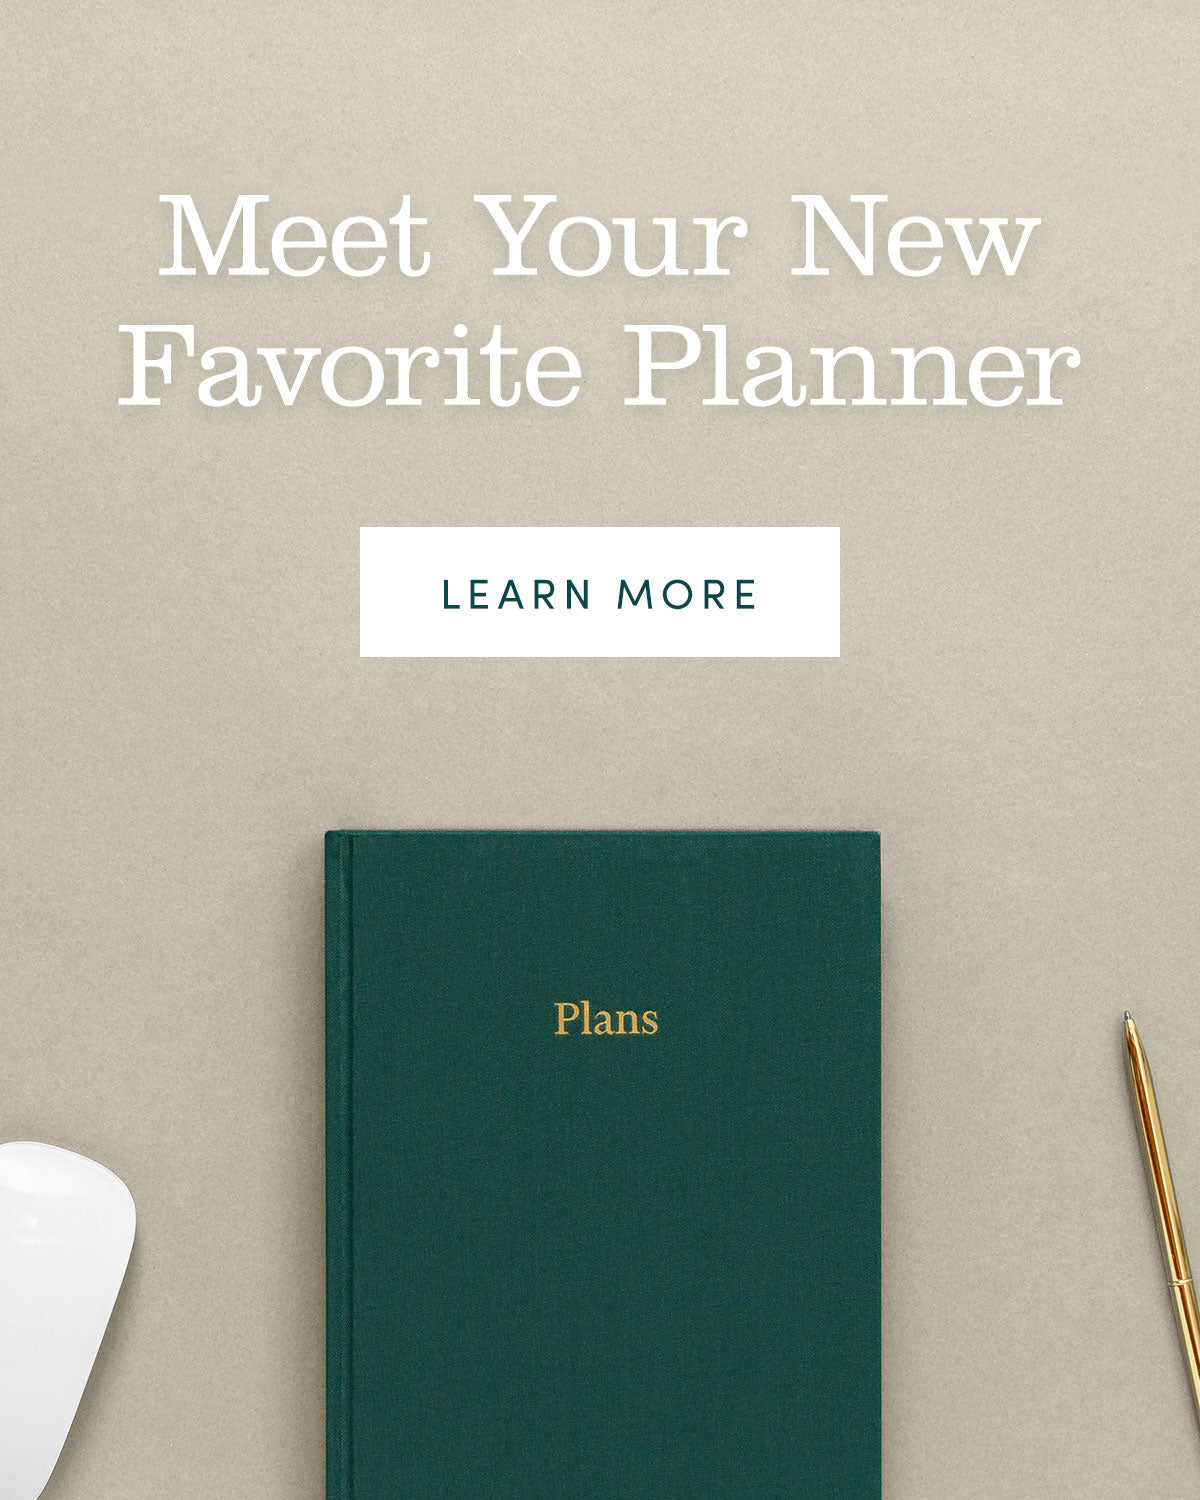 Meet your new favorite planner. Desk scene with mouse, planner, and brass pen.